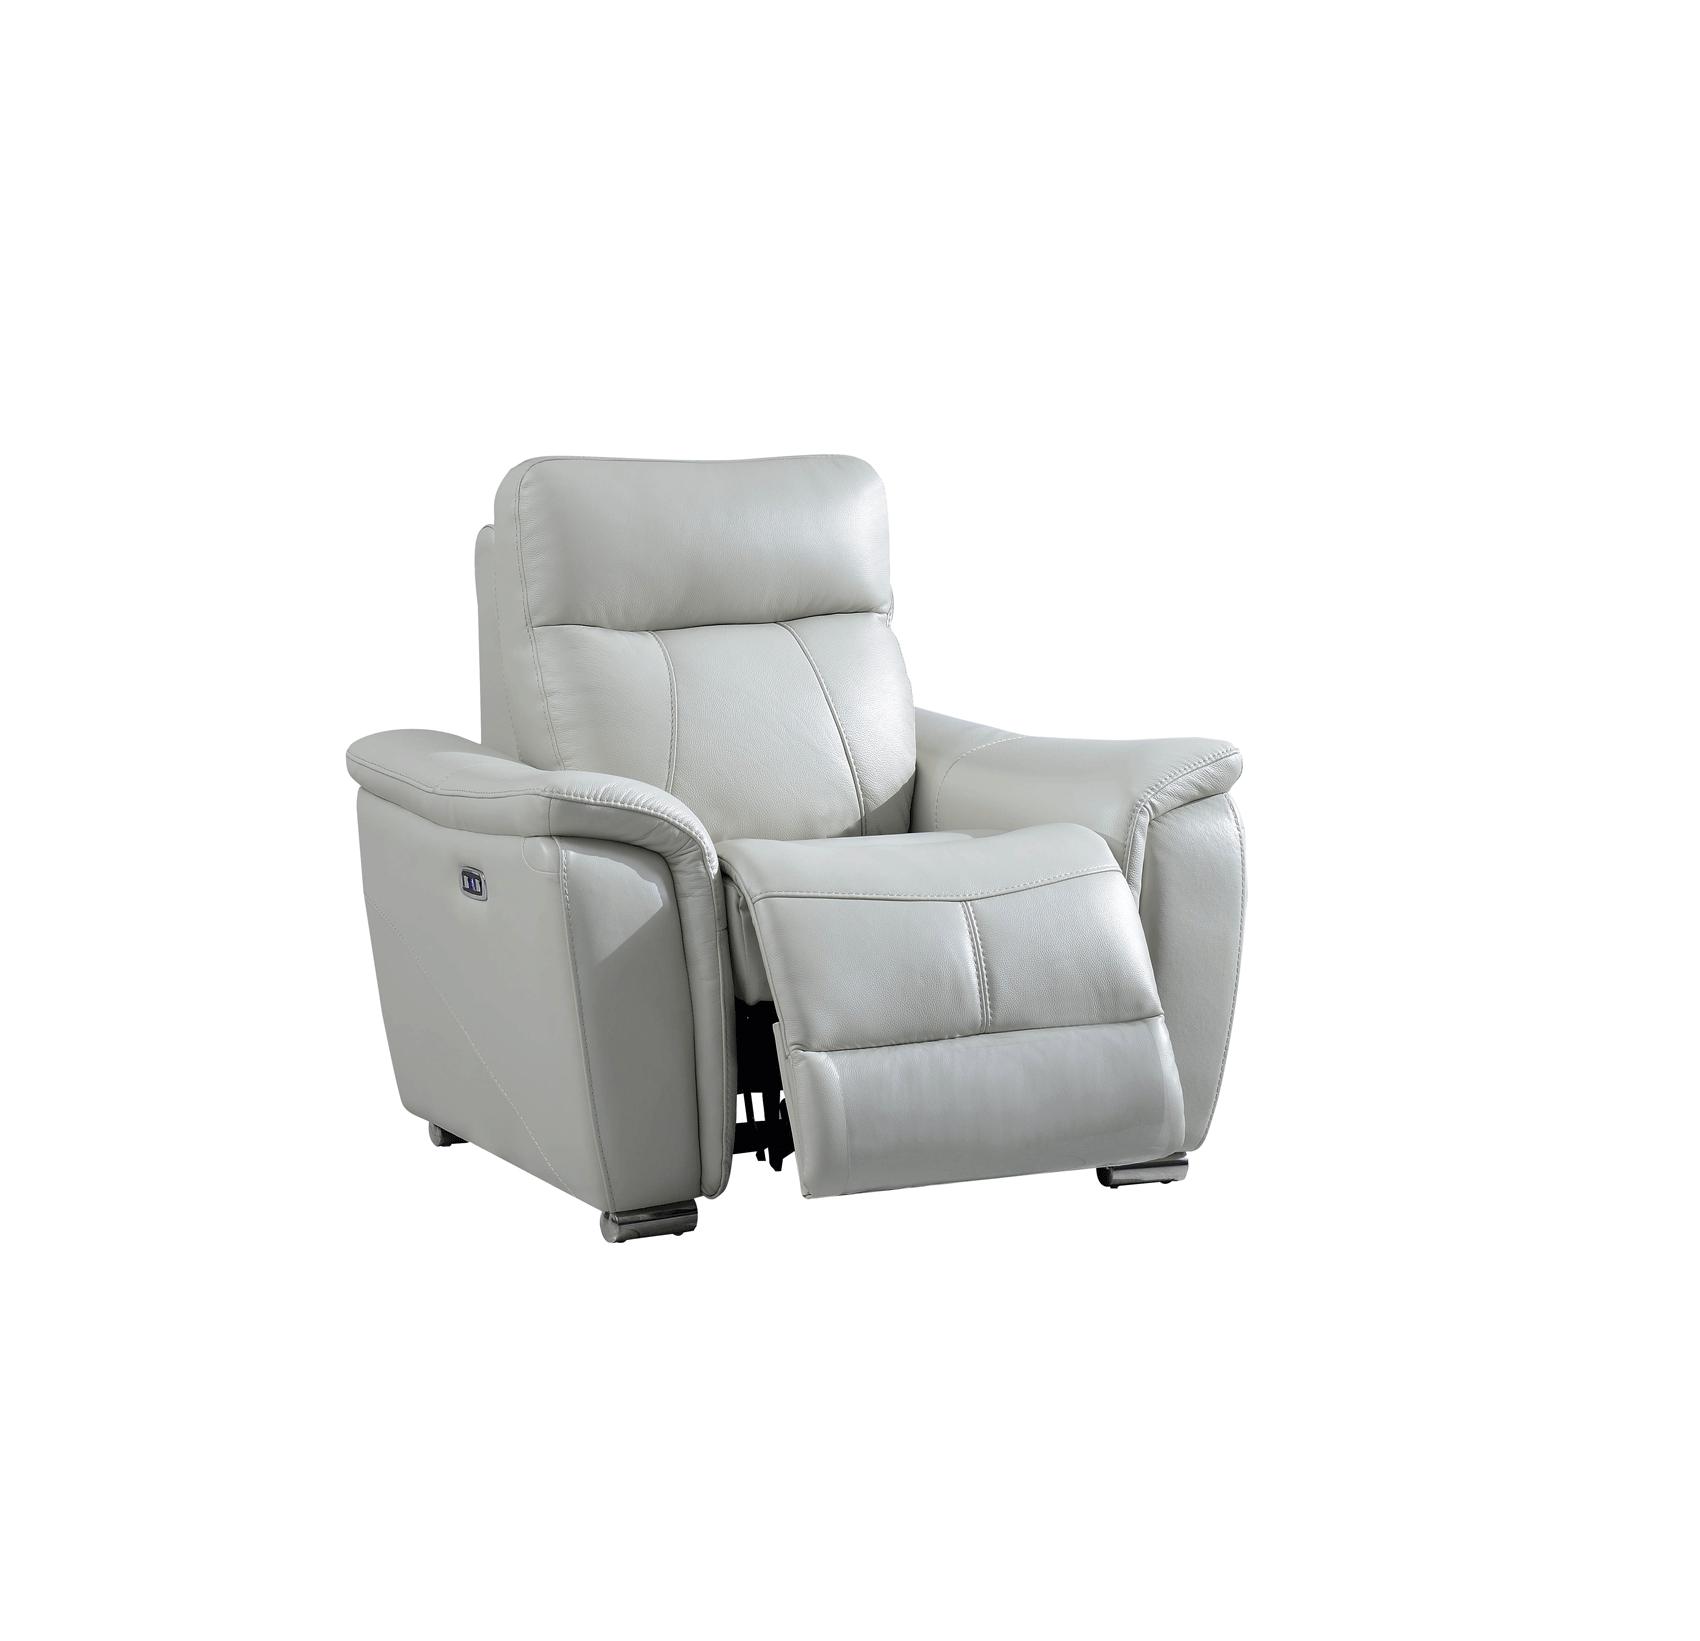 Contemporary, Modern Reclining Chair 1705 ESF-1705-Chair in Light Gray Top-grain Leather